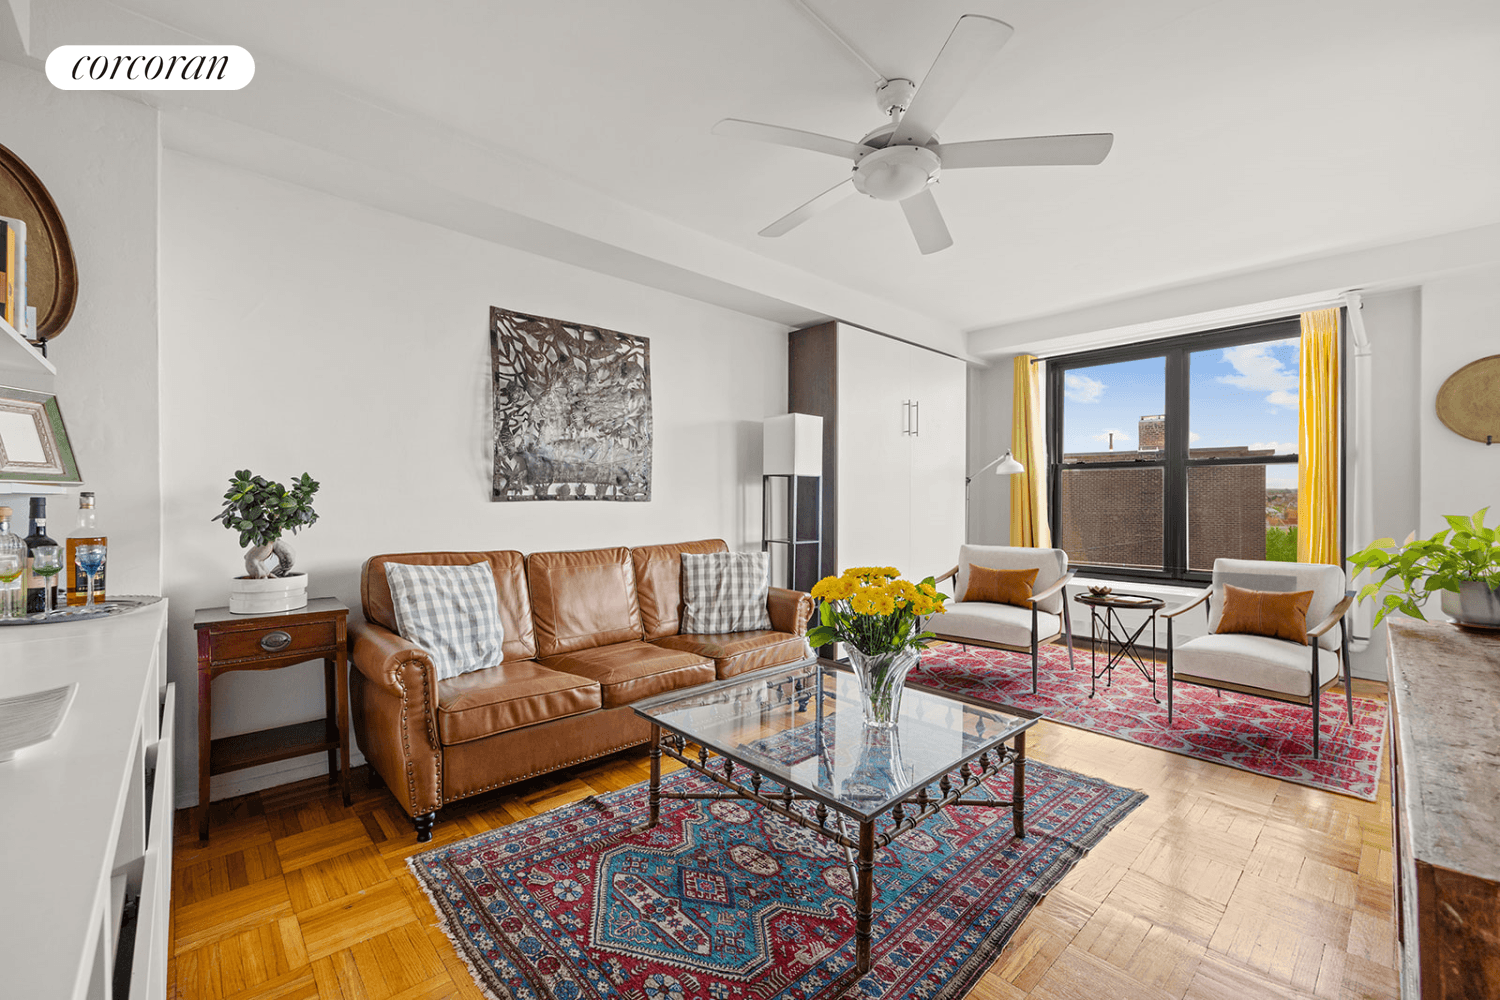 This remarkable top floor home floats above the historic, tree lined streets of Clinton Hill, Brooklyn on the border with Fort Greene.